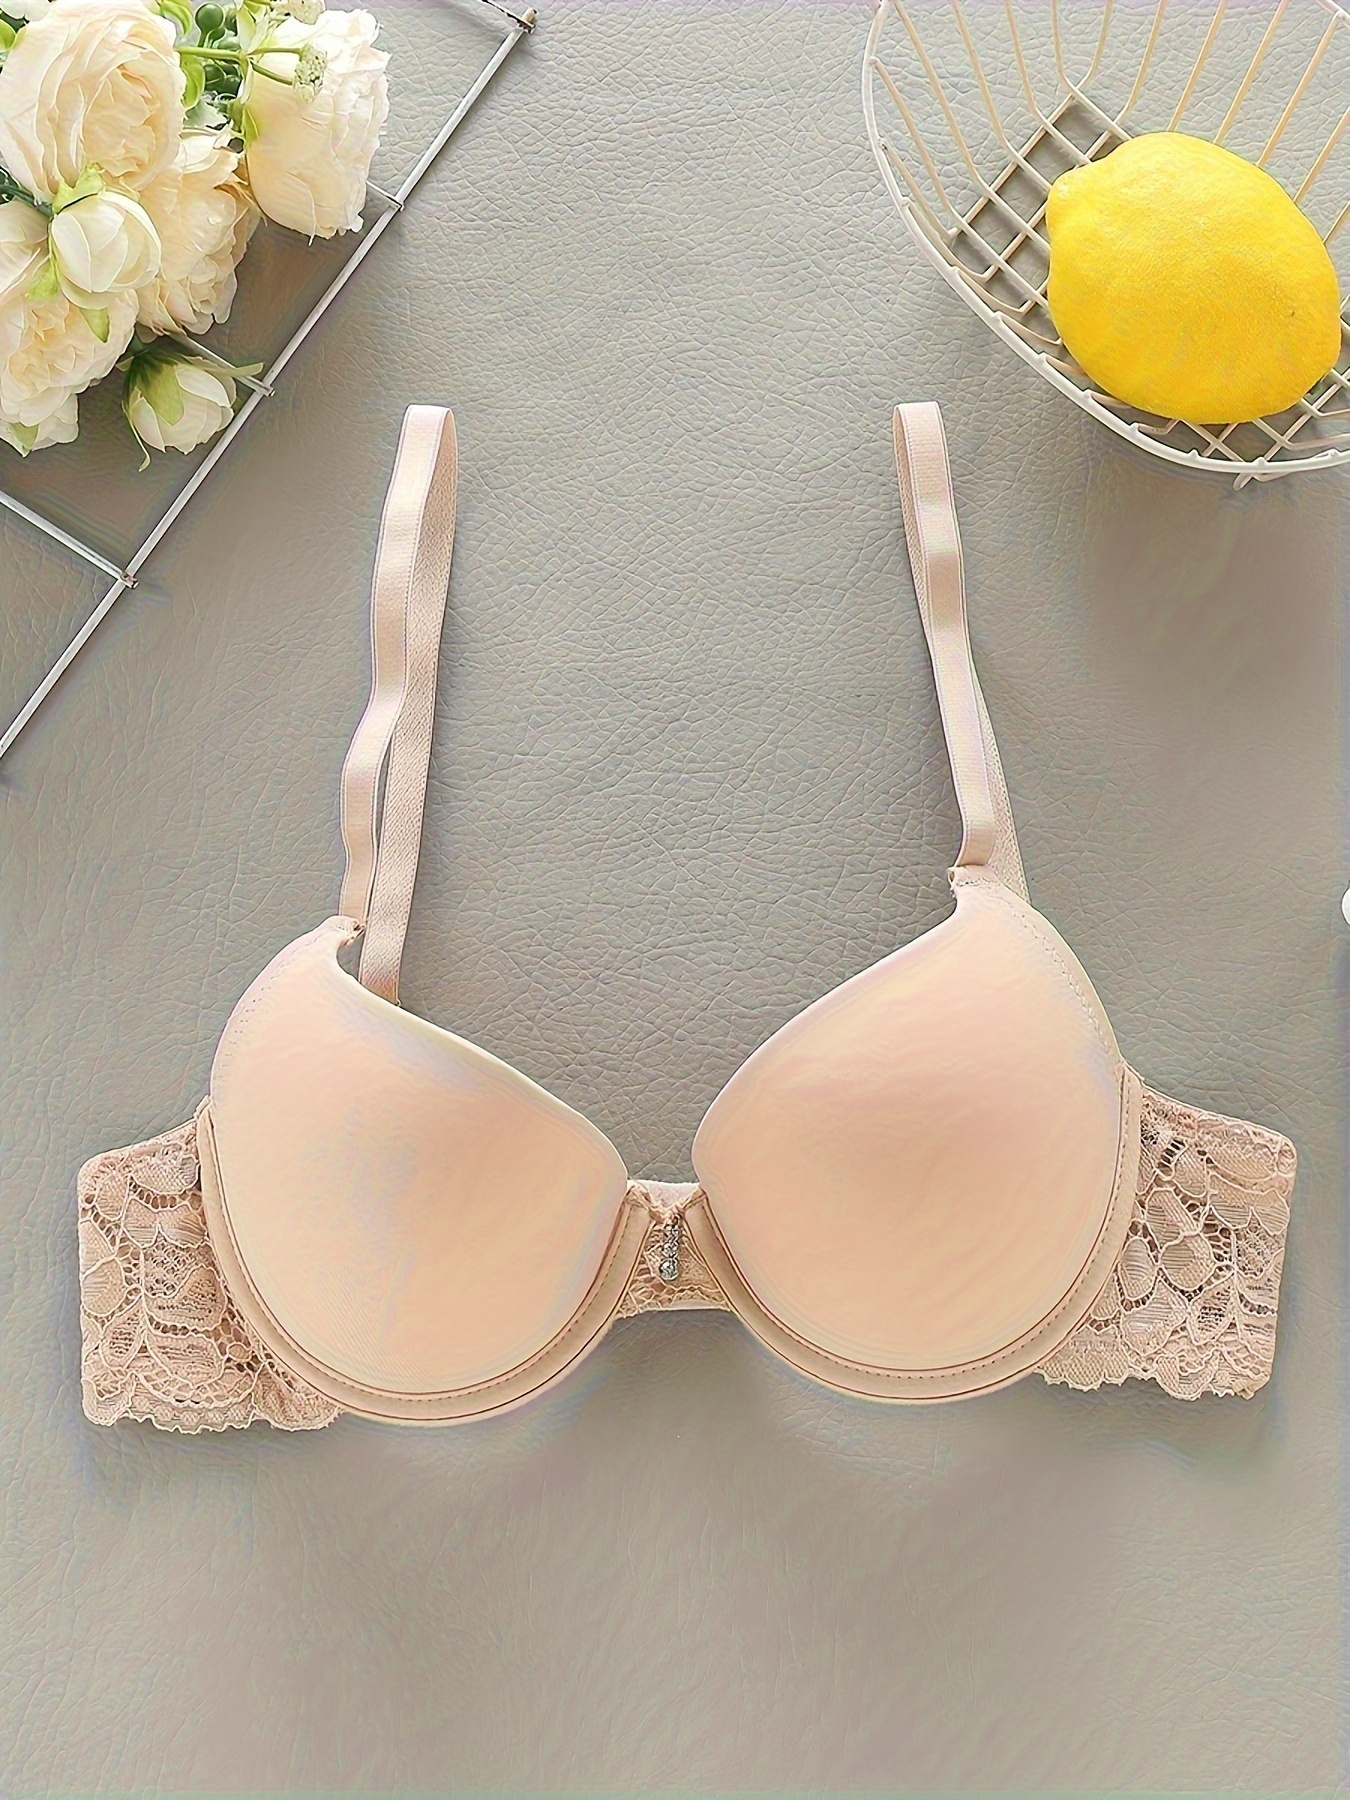  Padded Push Up Bras For Women Lace Underwire T